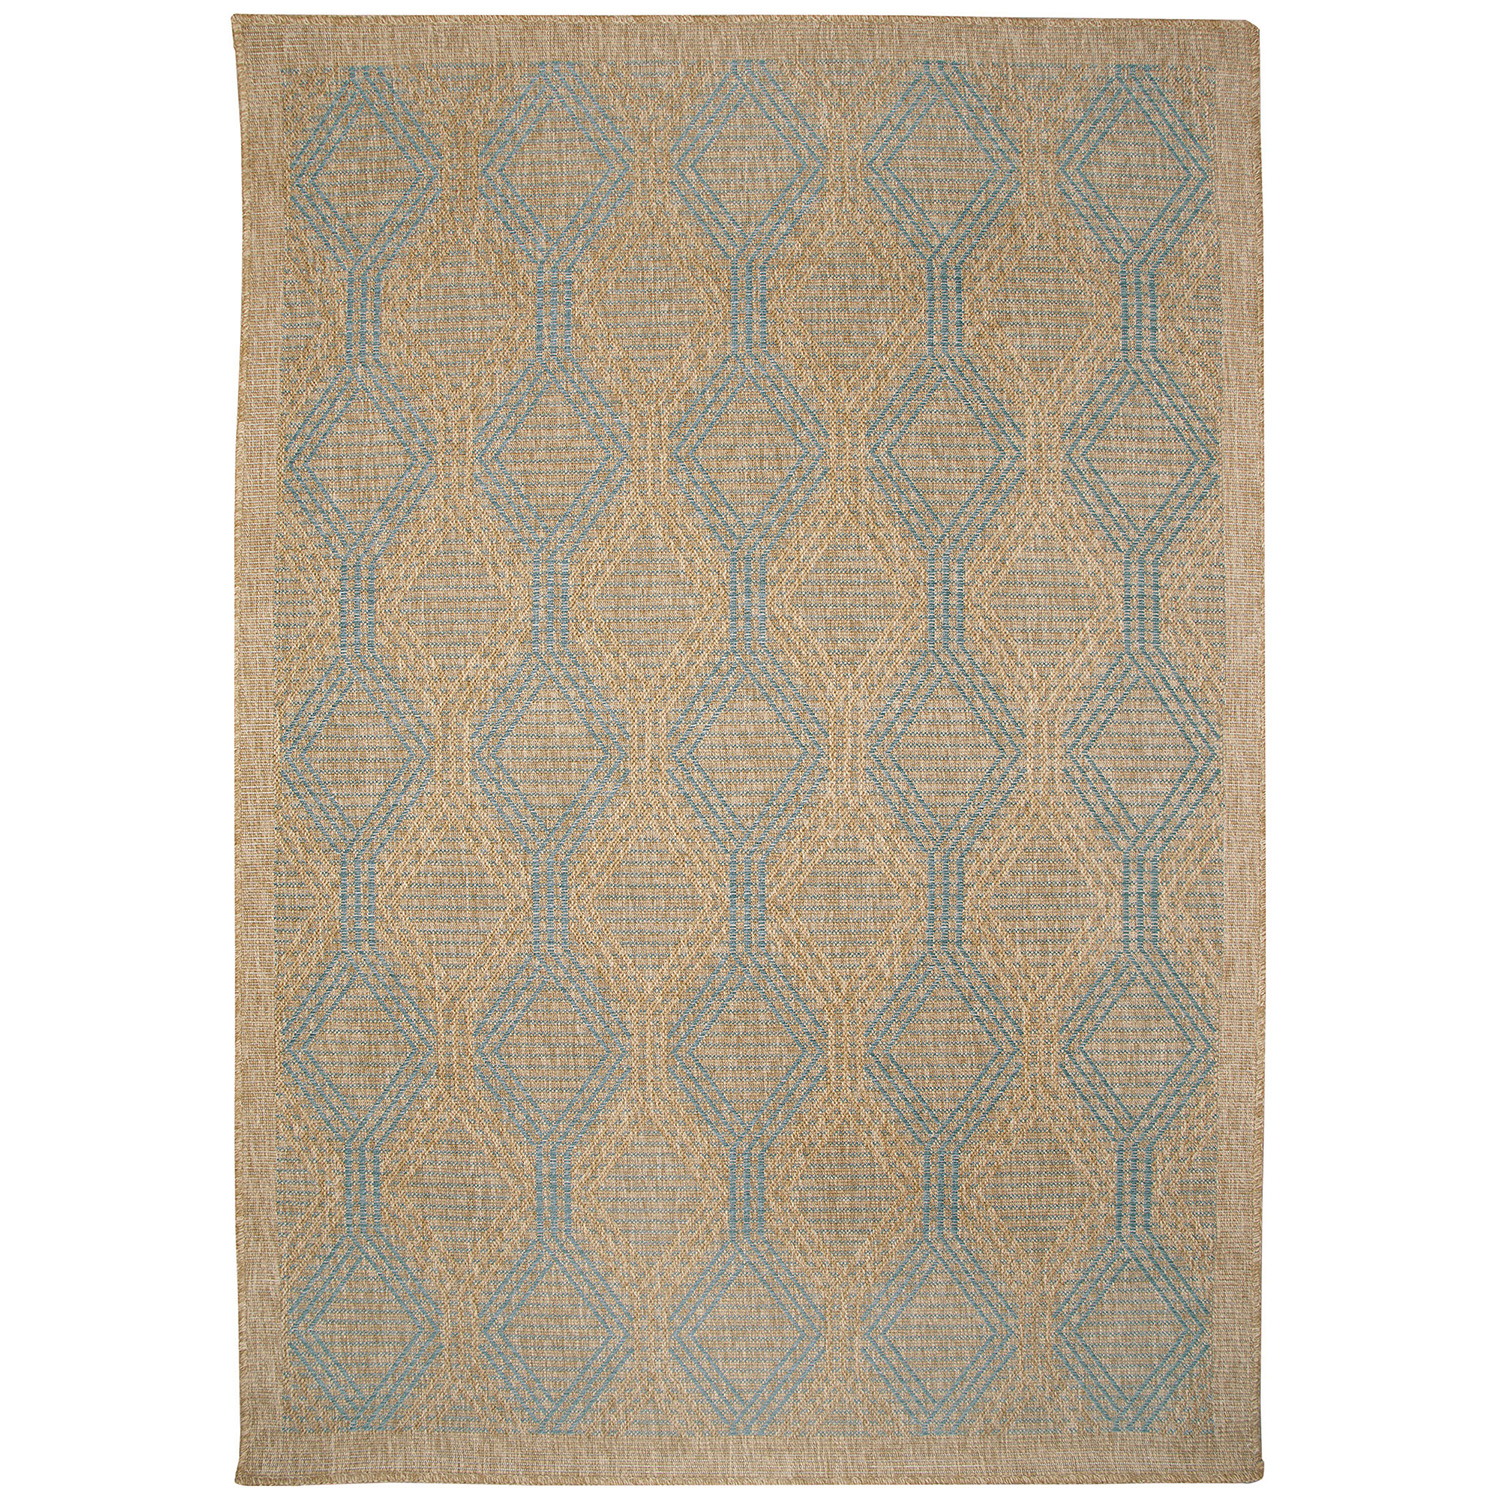 Liora Manne Sahara Low Profile  Easy Care Woven Weather Resistant Rug- Links Aruba  Product Image